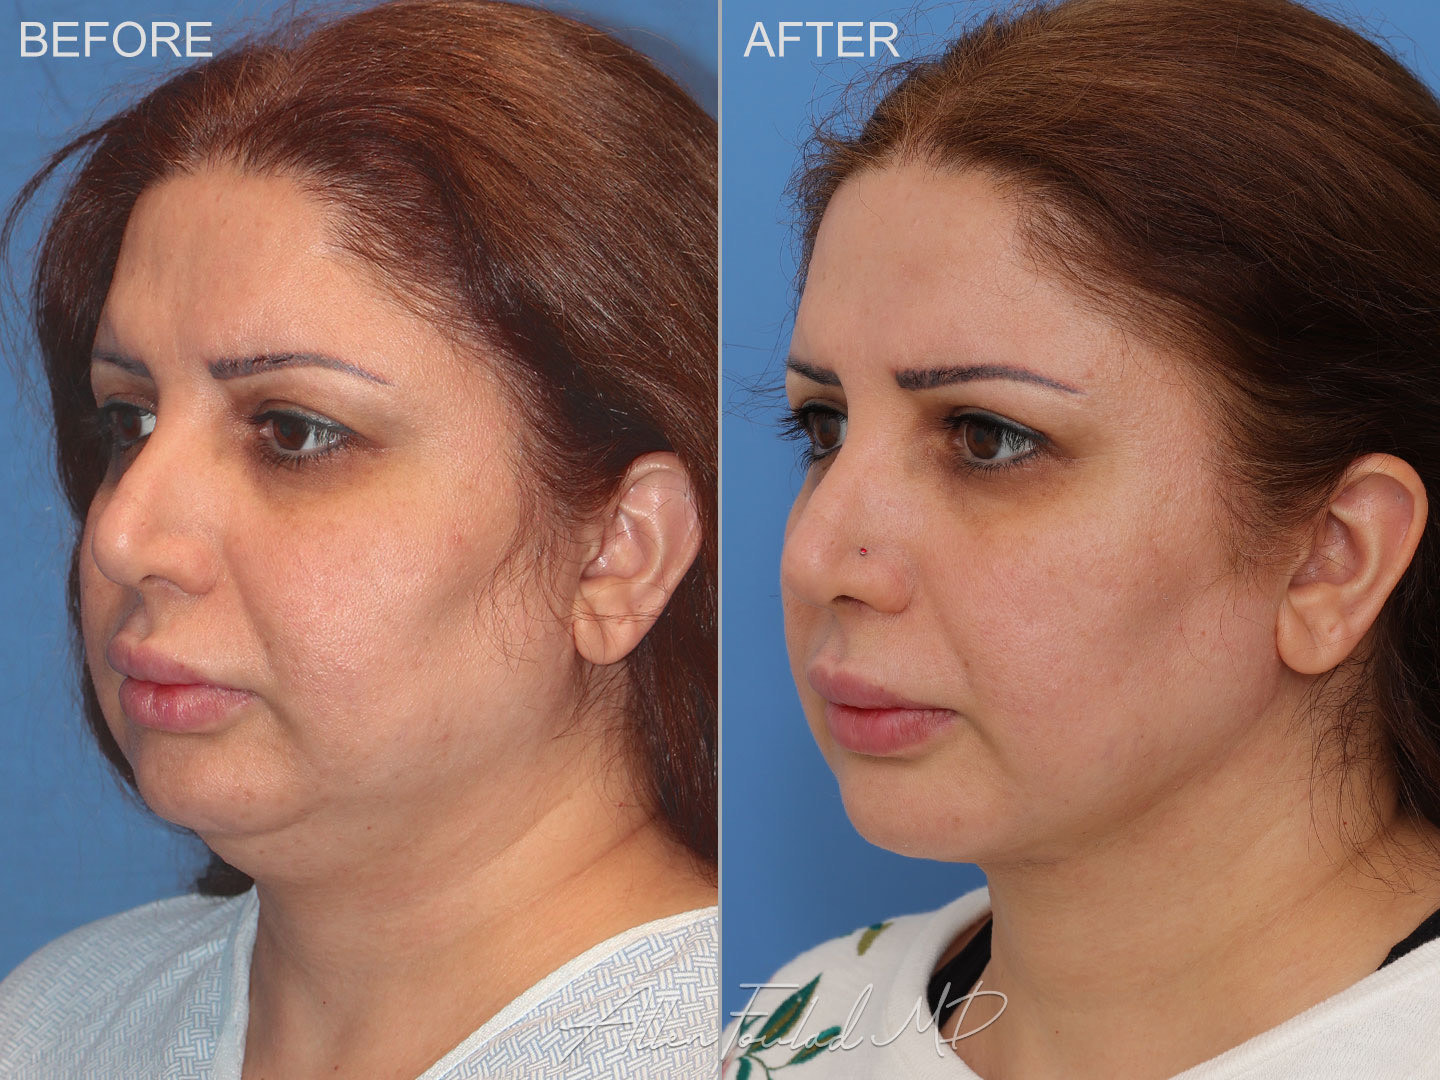 Face & Neck Liposuction Before and After Photo by Allen Foulad MD in Beverly Hills, CA